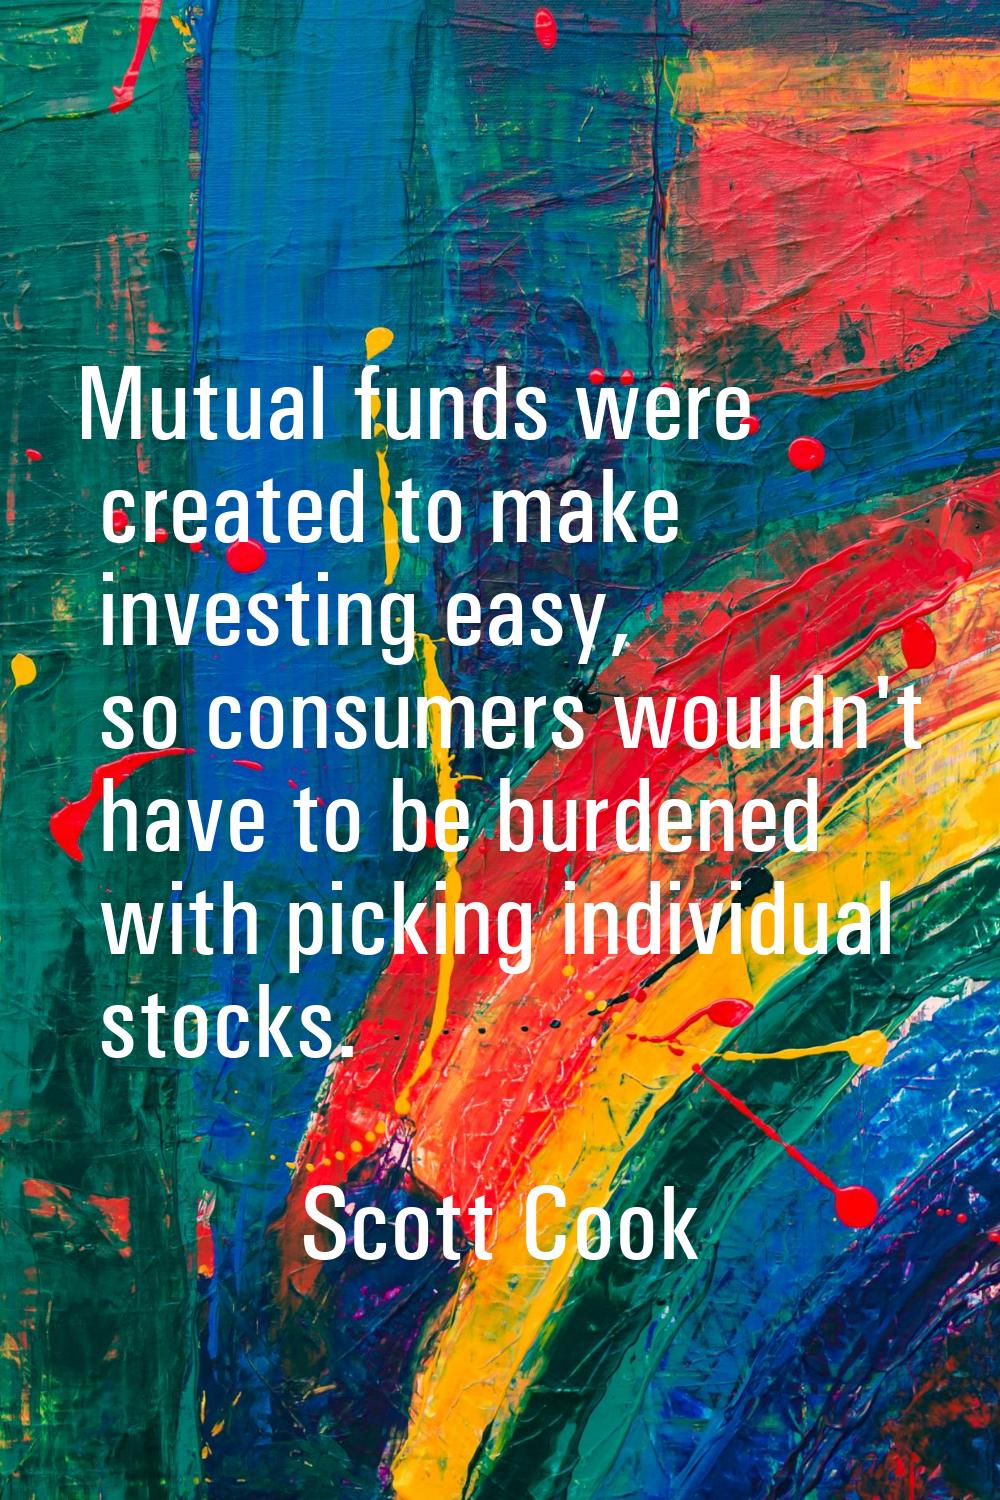 Mutual funds were created to make investing easy, so consumers wouldn't have to be burdened with pi